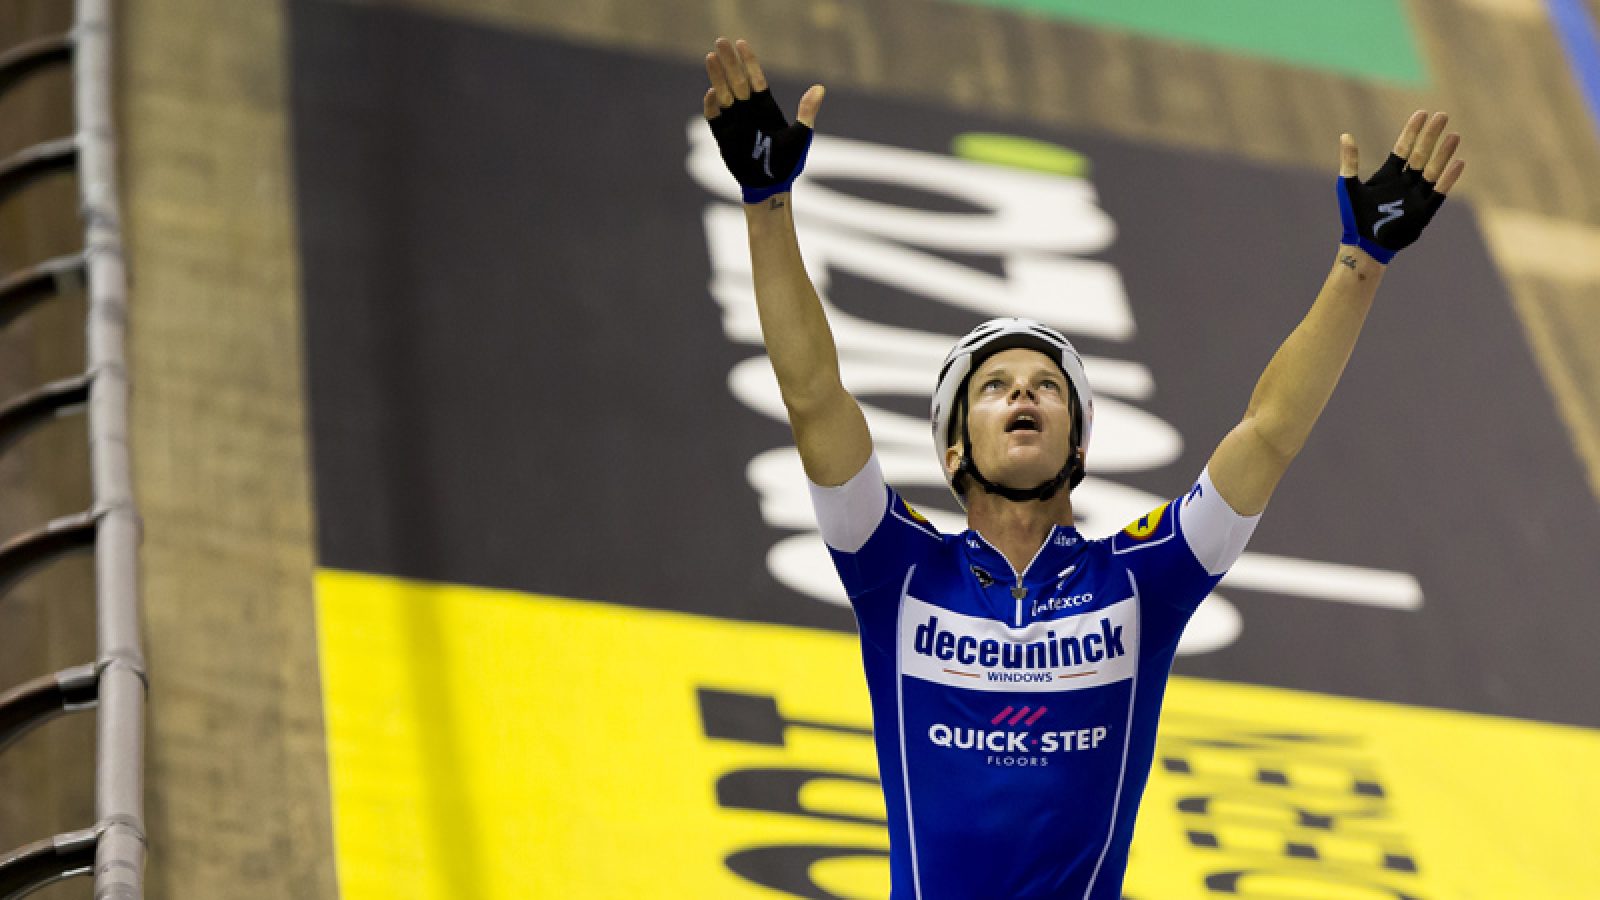 Belgian Iljo Keisse celebrates after winning the last day of the Zesdaagse Vlaanderen-Gent six-day indoor cycling race at the indoor cycling arena 't Kuipke, Saturday 17 November 2018, in Gent. This year's edition takes place from November 13th until November 18th. BELGA PHOTO KRISTOF VAN ACCOM